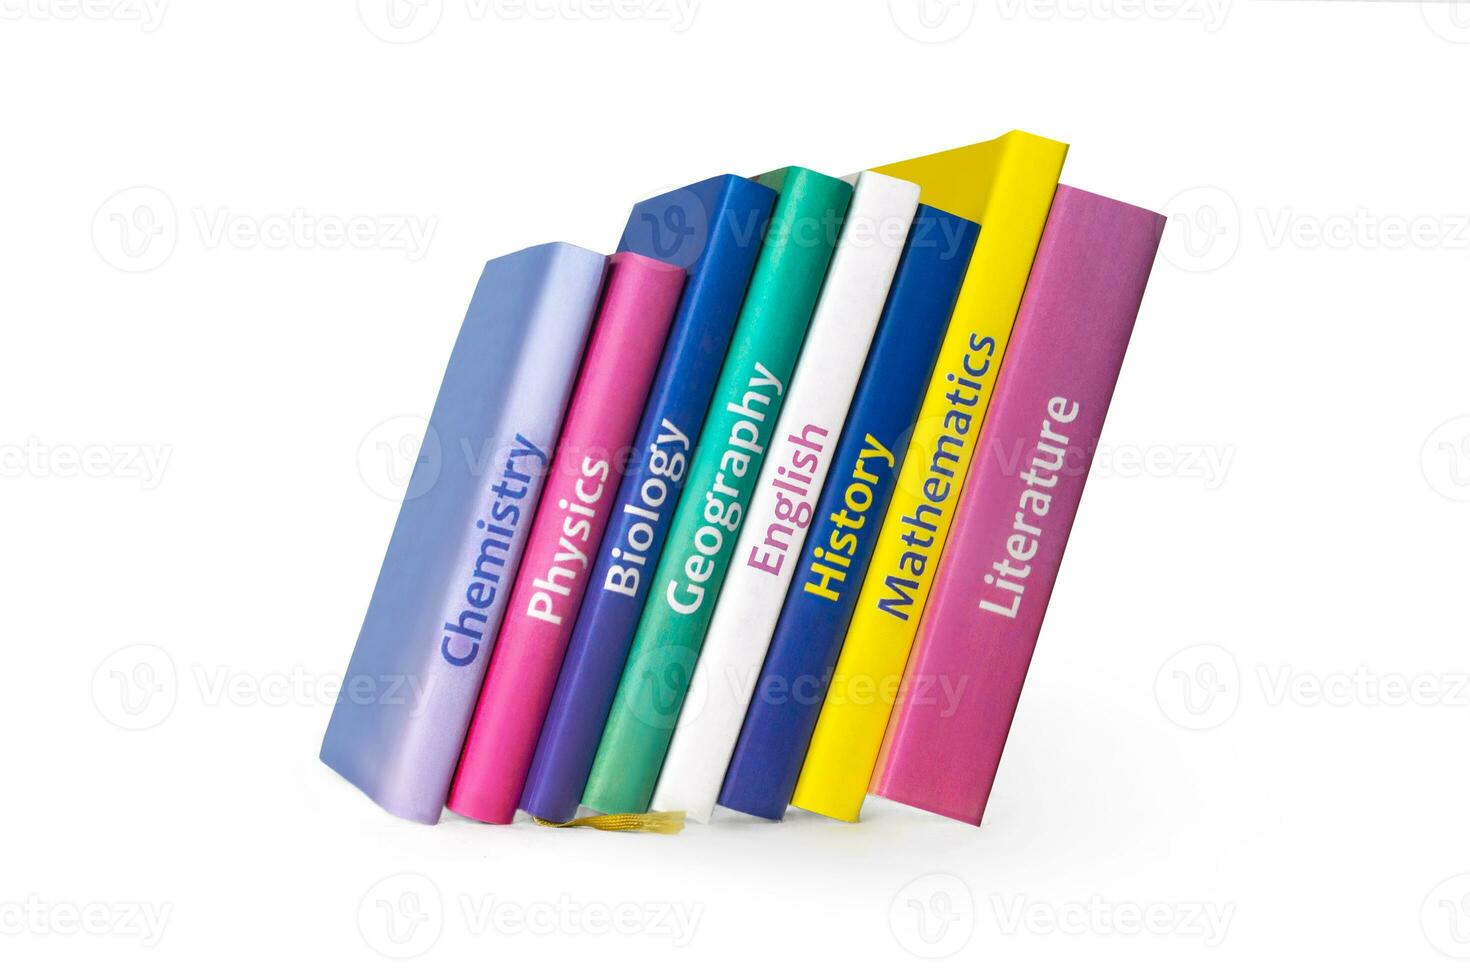 School colourfull textbooks isolated on white background. Books are on the shelf. Basic school subjects mathematics, literature, physic,s chemistry photo